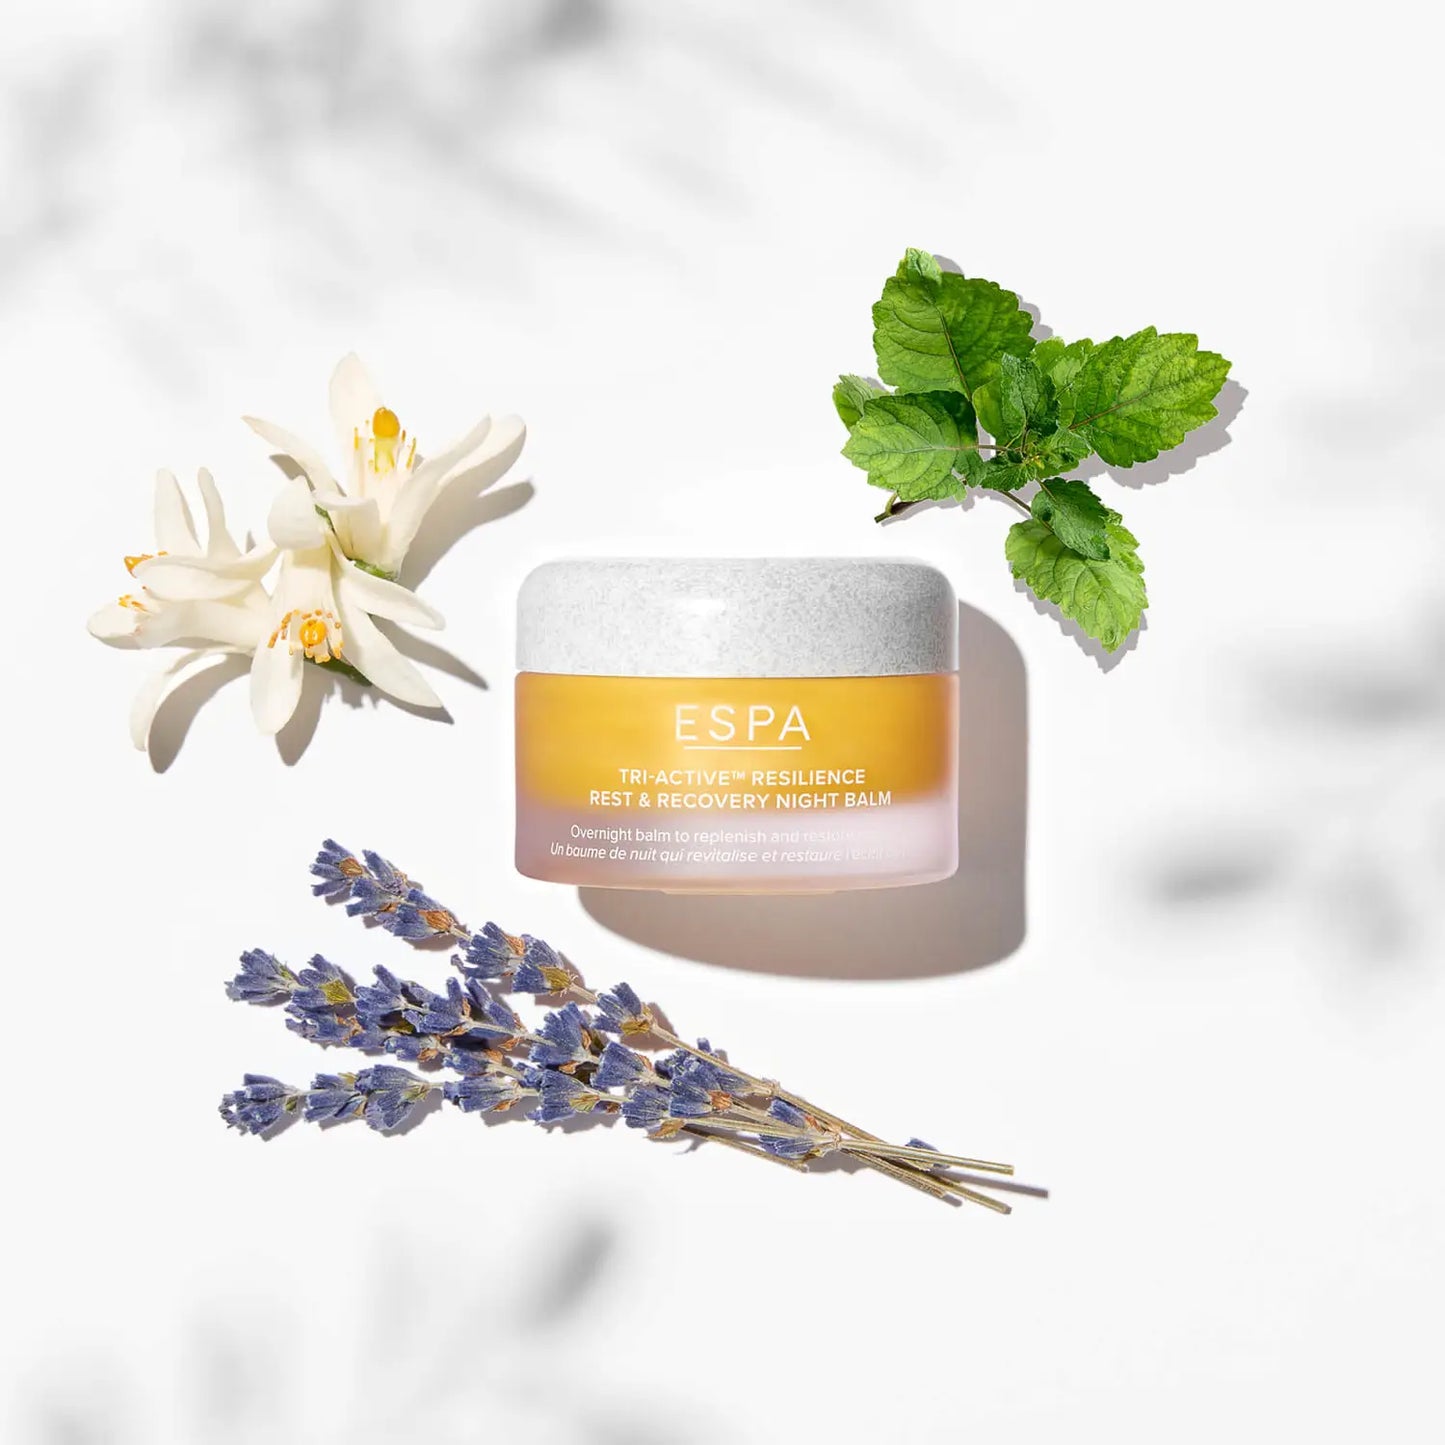 ESPA Tri-Active Resilience Rest and Recovery Night Balm